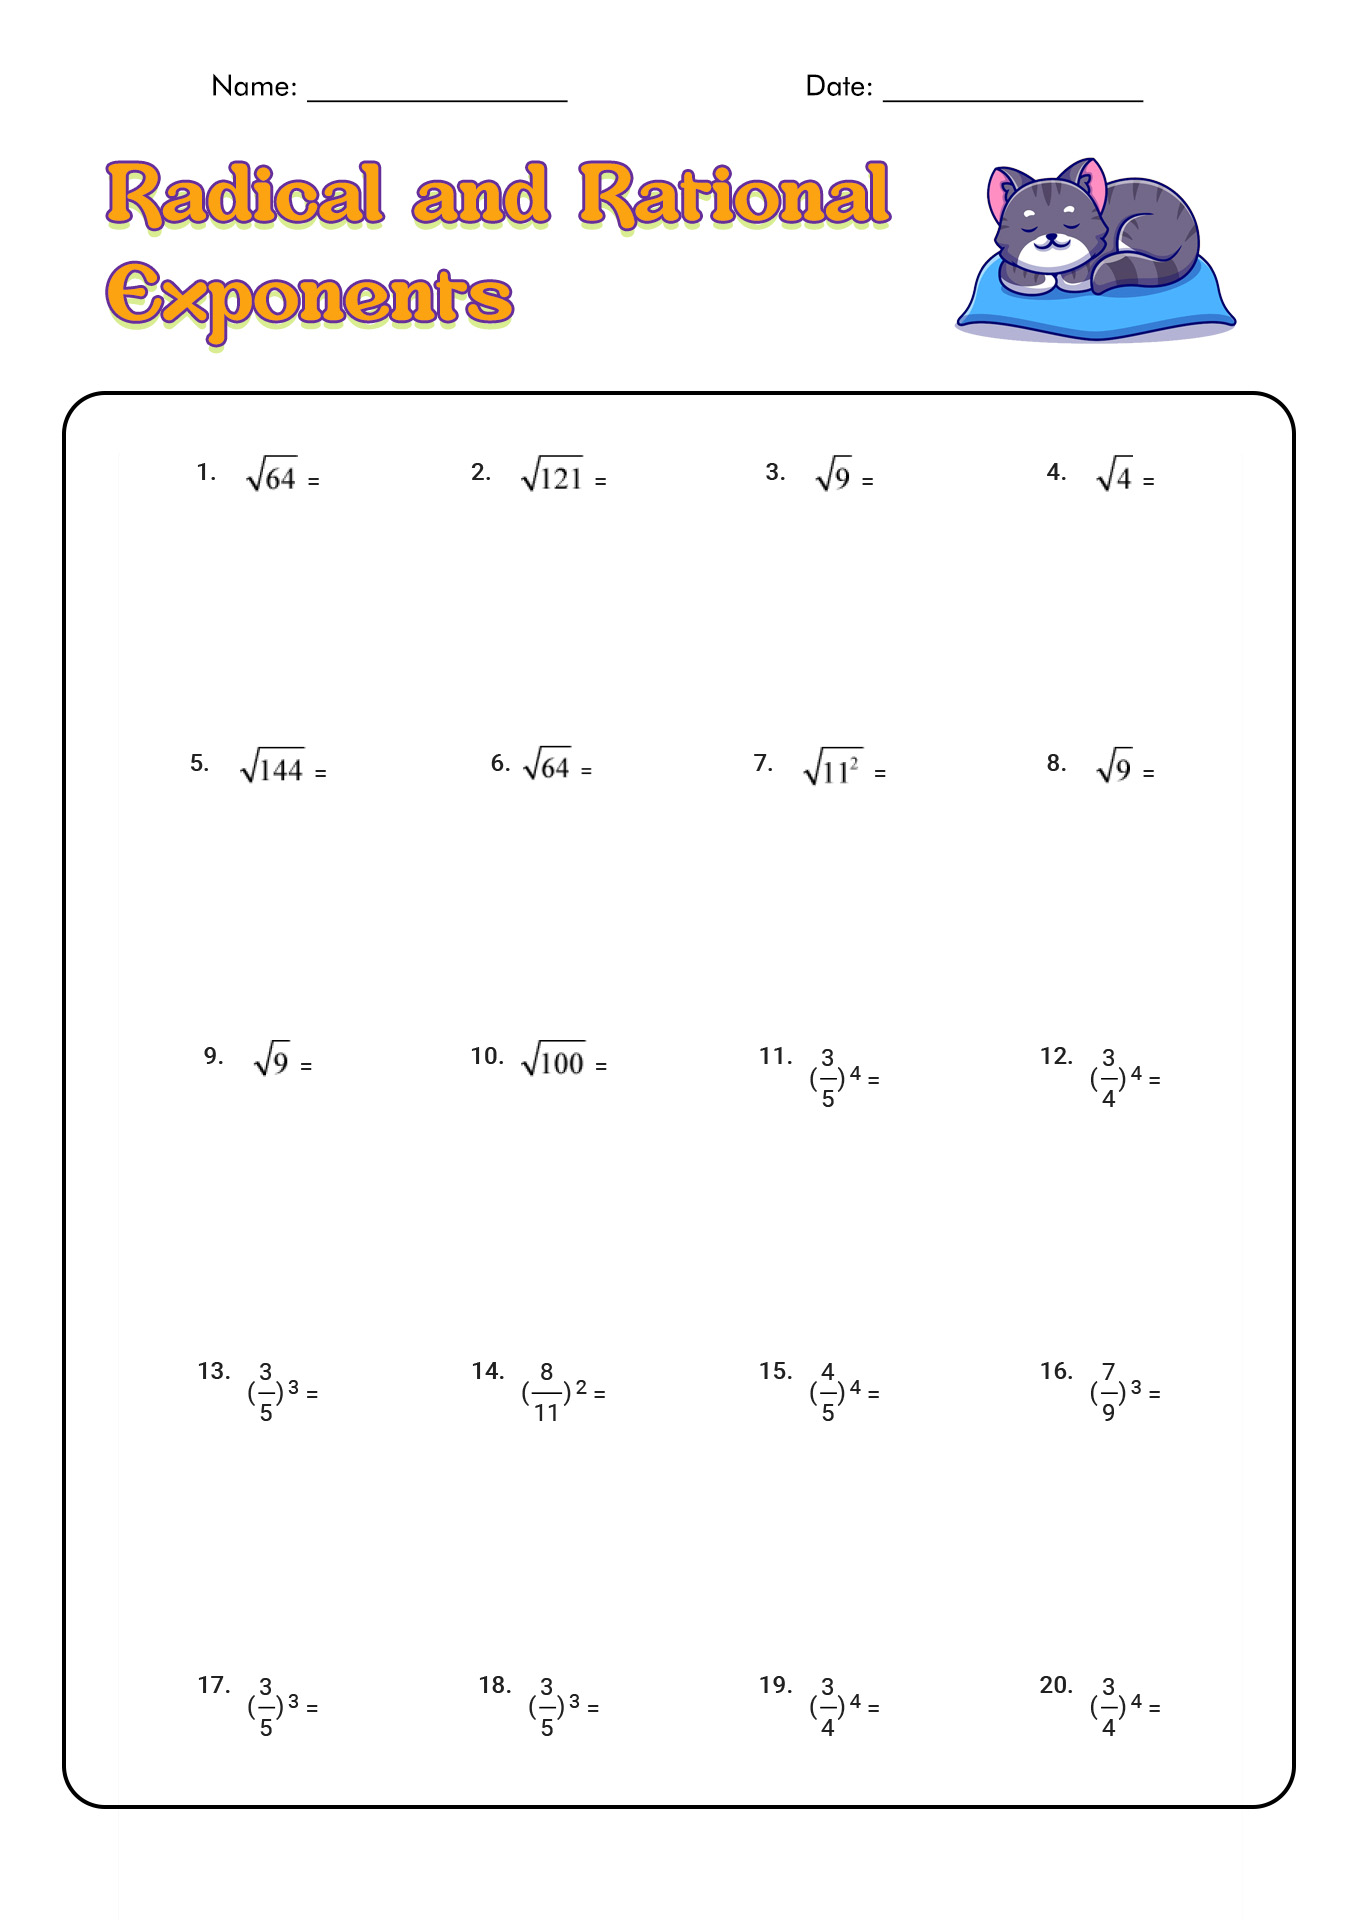 Radical and Rational Exponents Worksheets Image